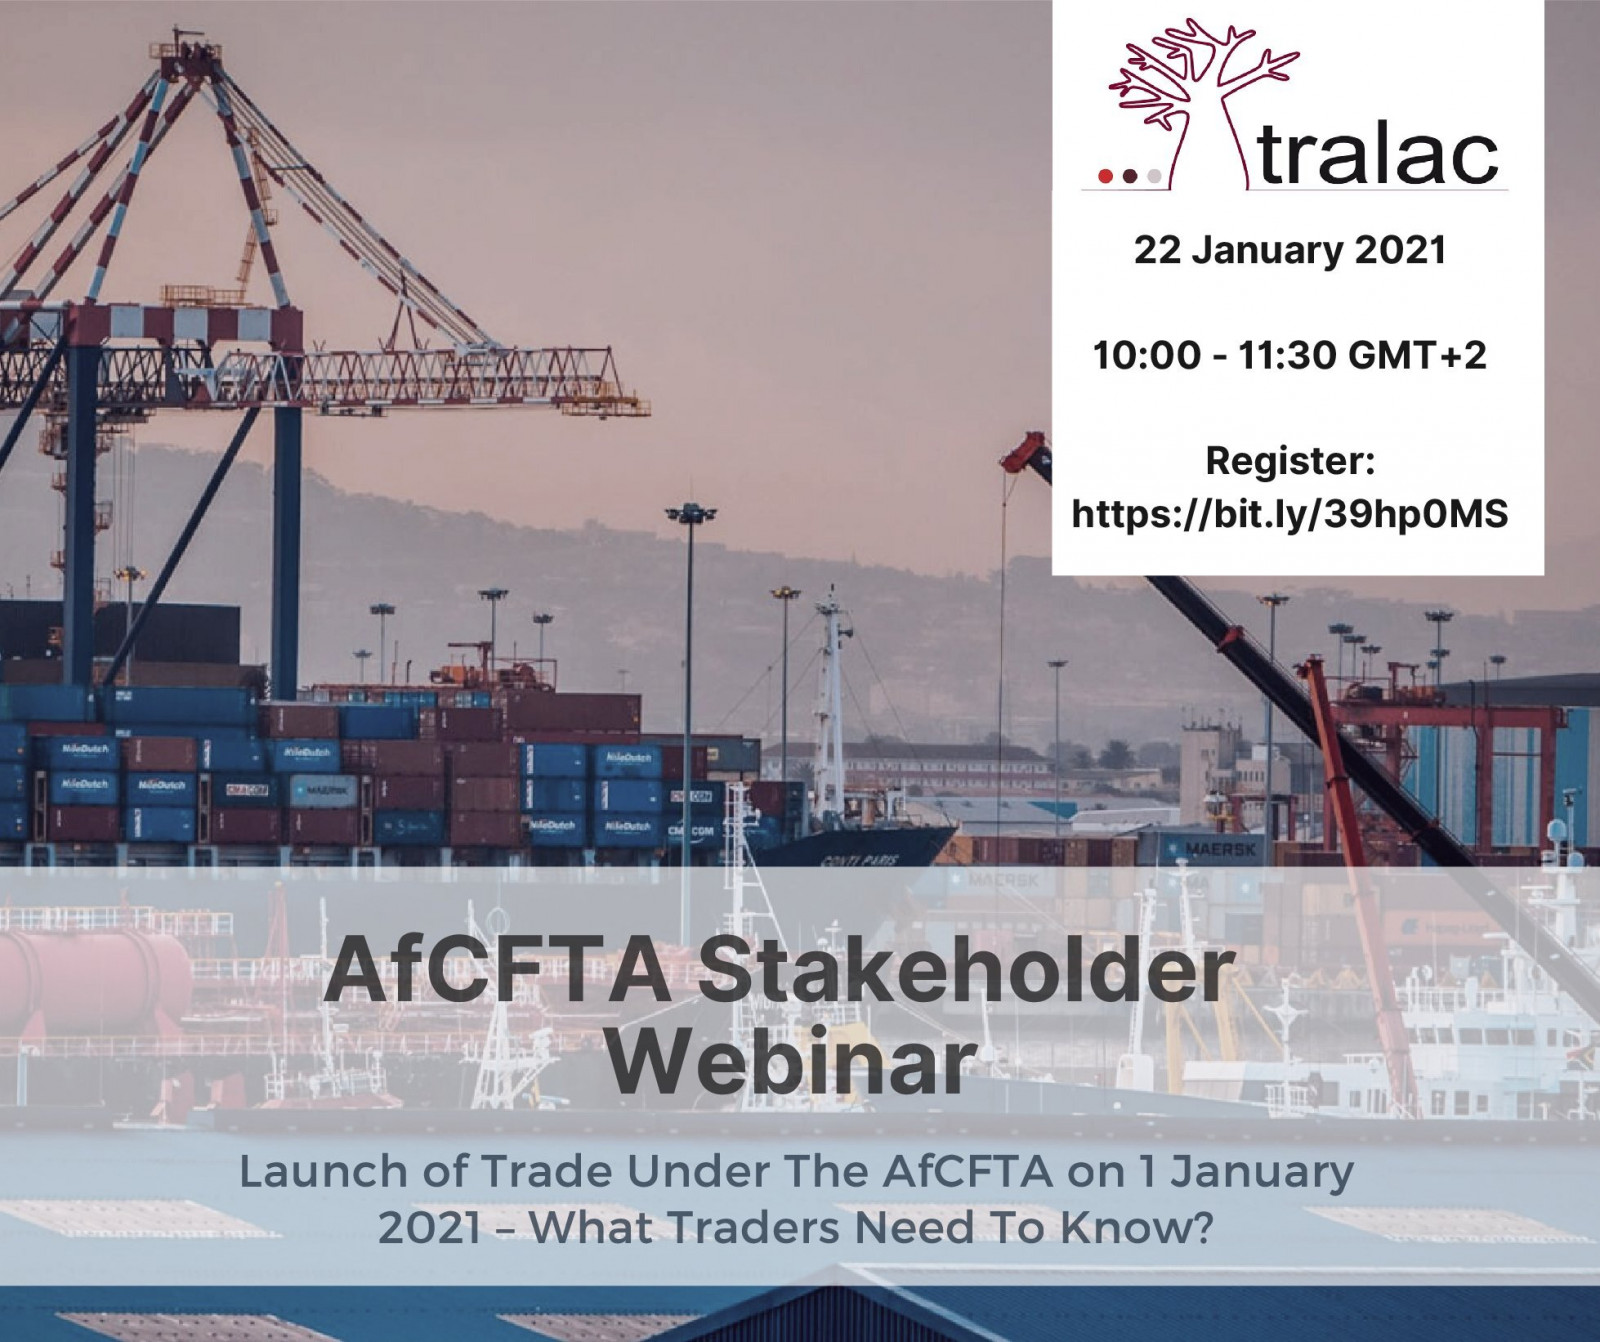 AfCFTA Stakeholder Webinar: Launch of trade under the AfCFTA - What traders need to know